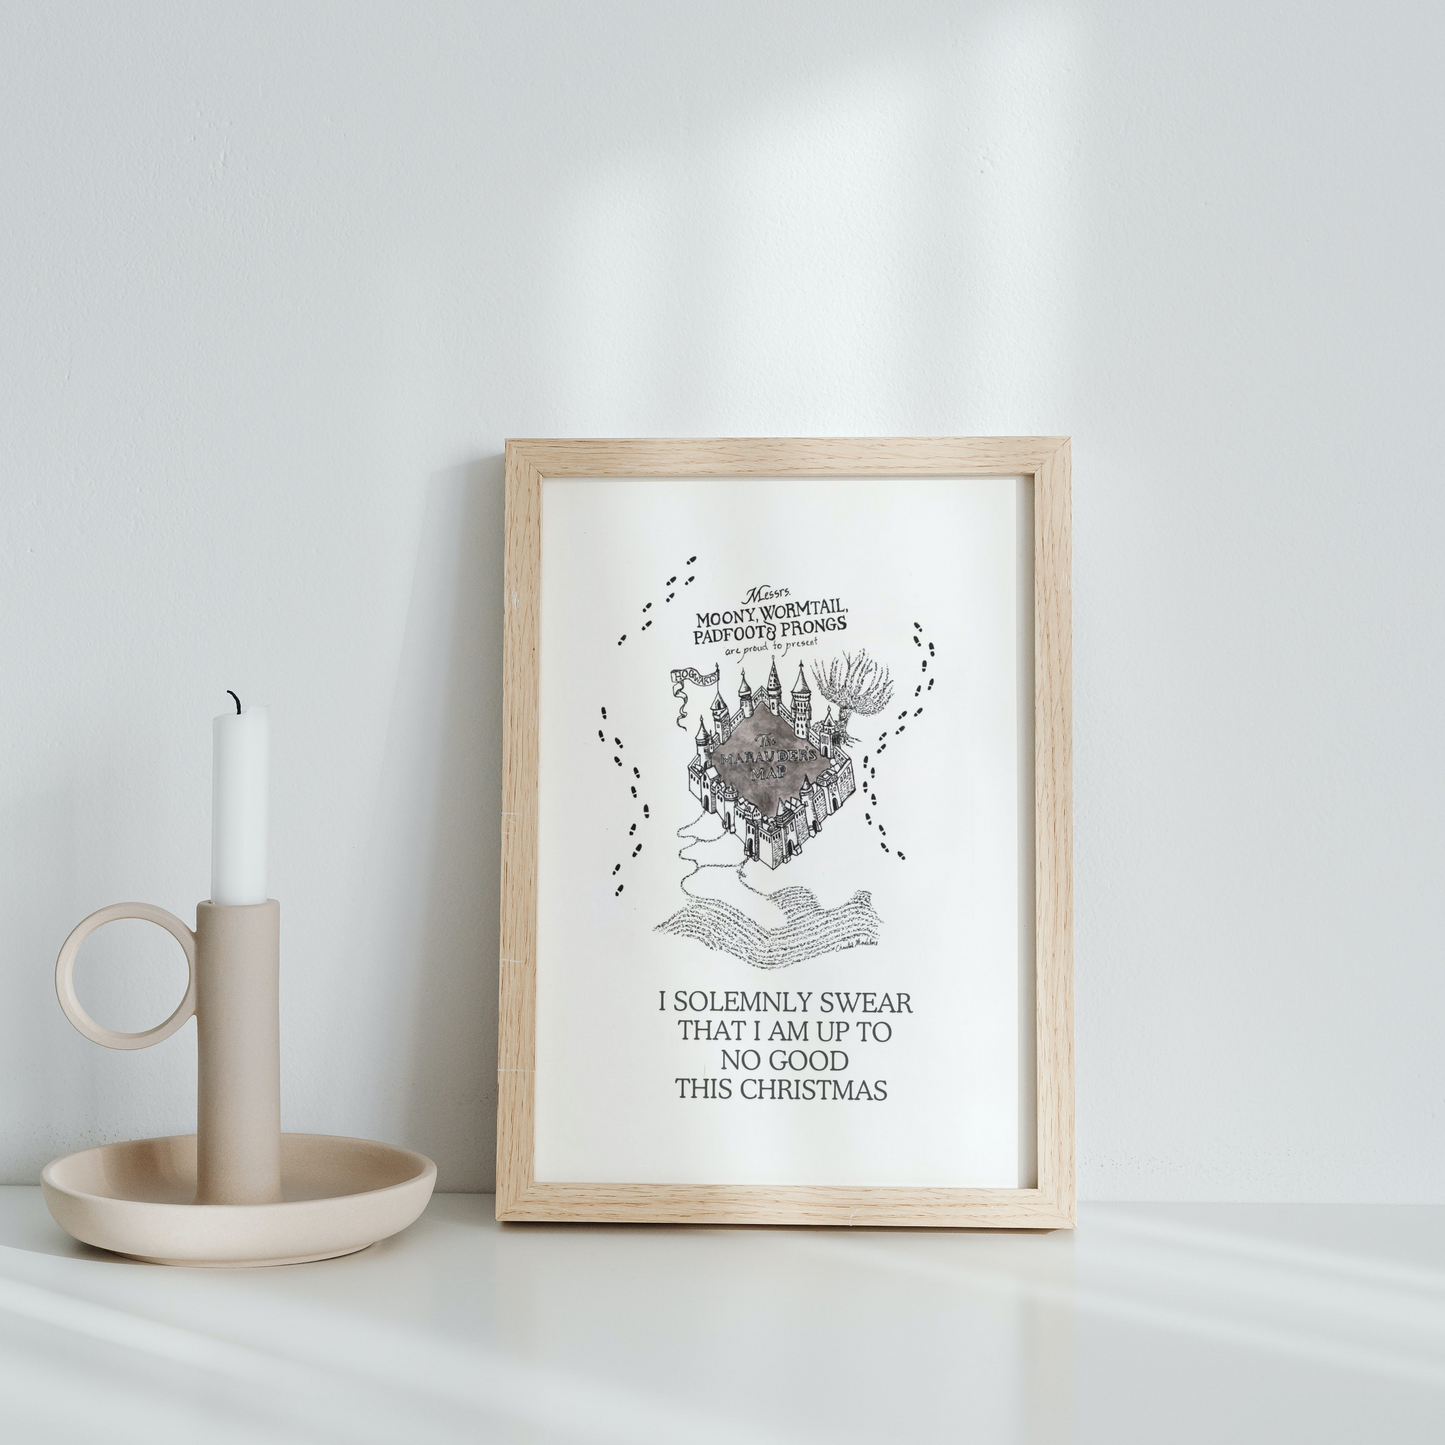 I Solemnly Swear I am up to no Good This Christmas, Harry Potter fan art Christmas, Marauders map, Art print on cardstock